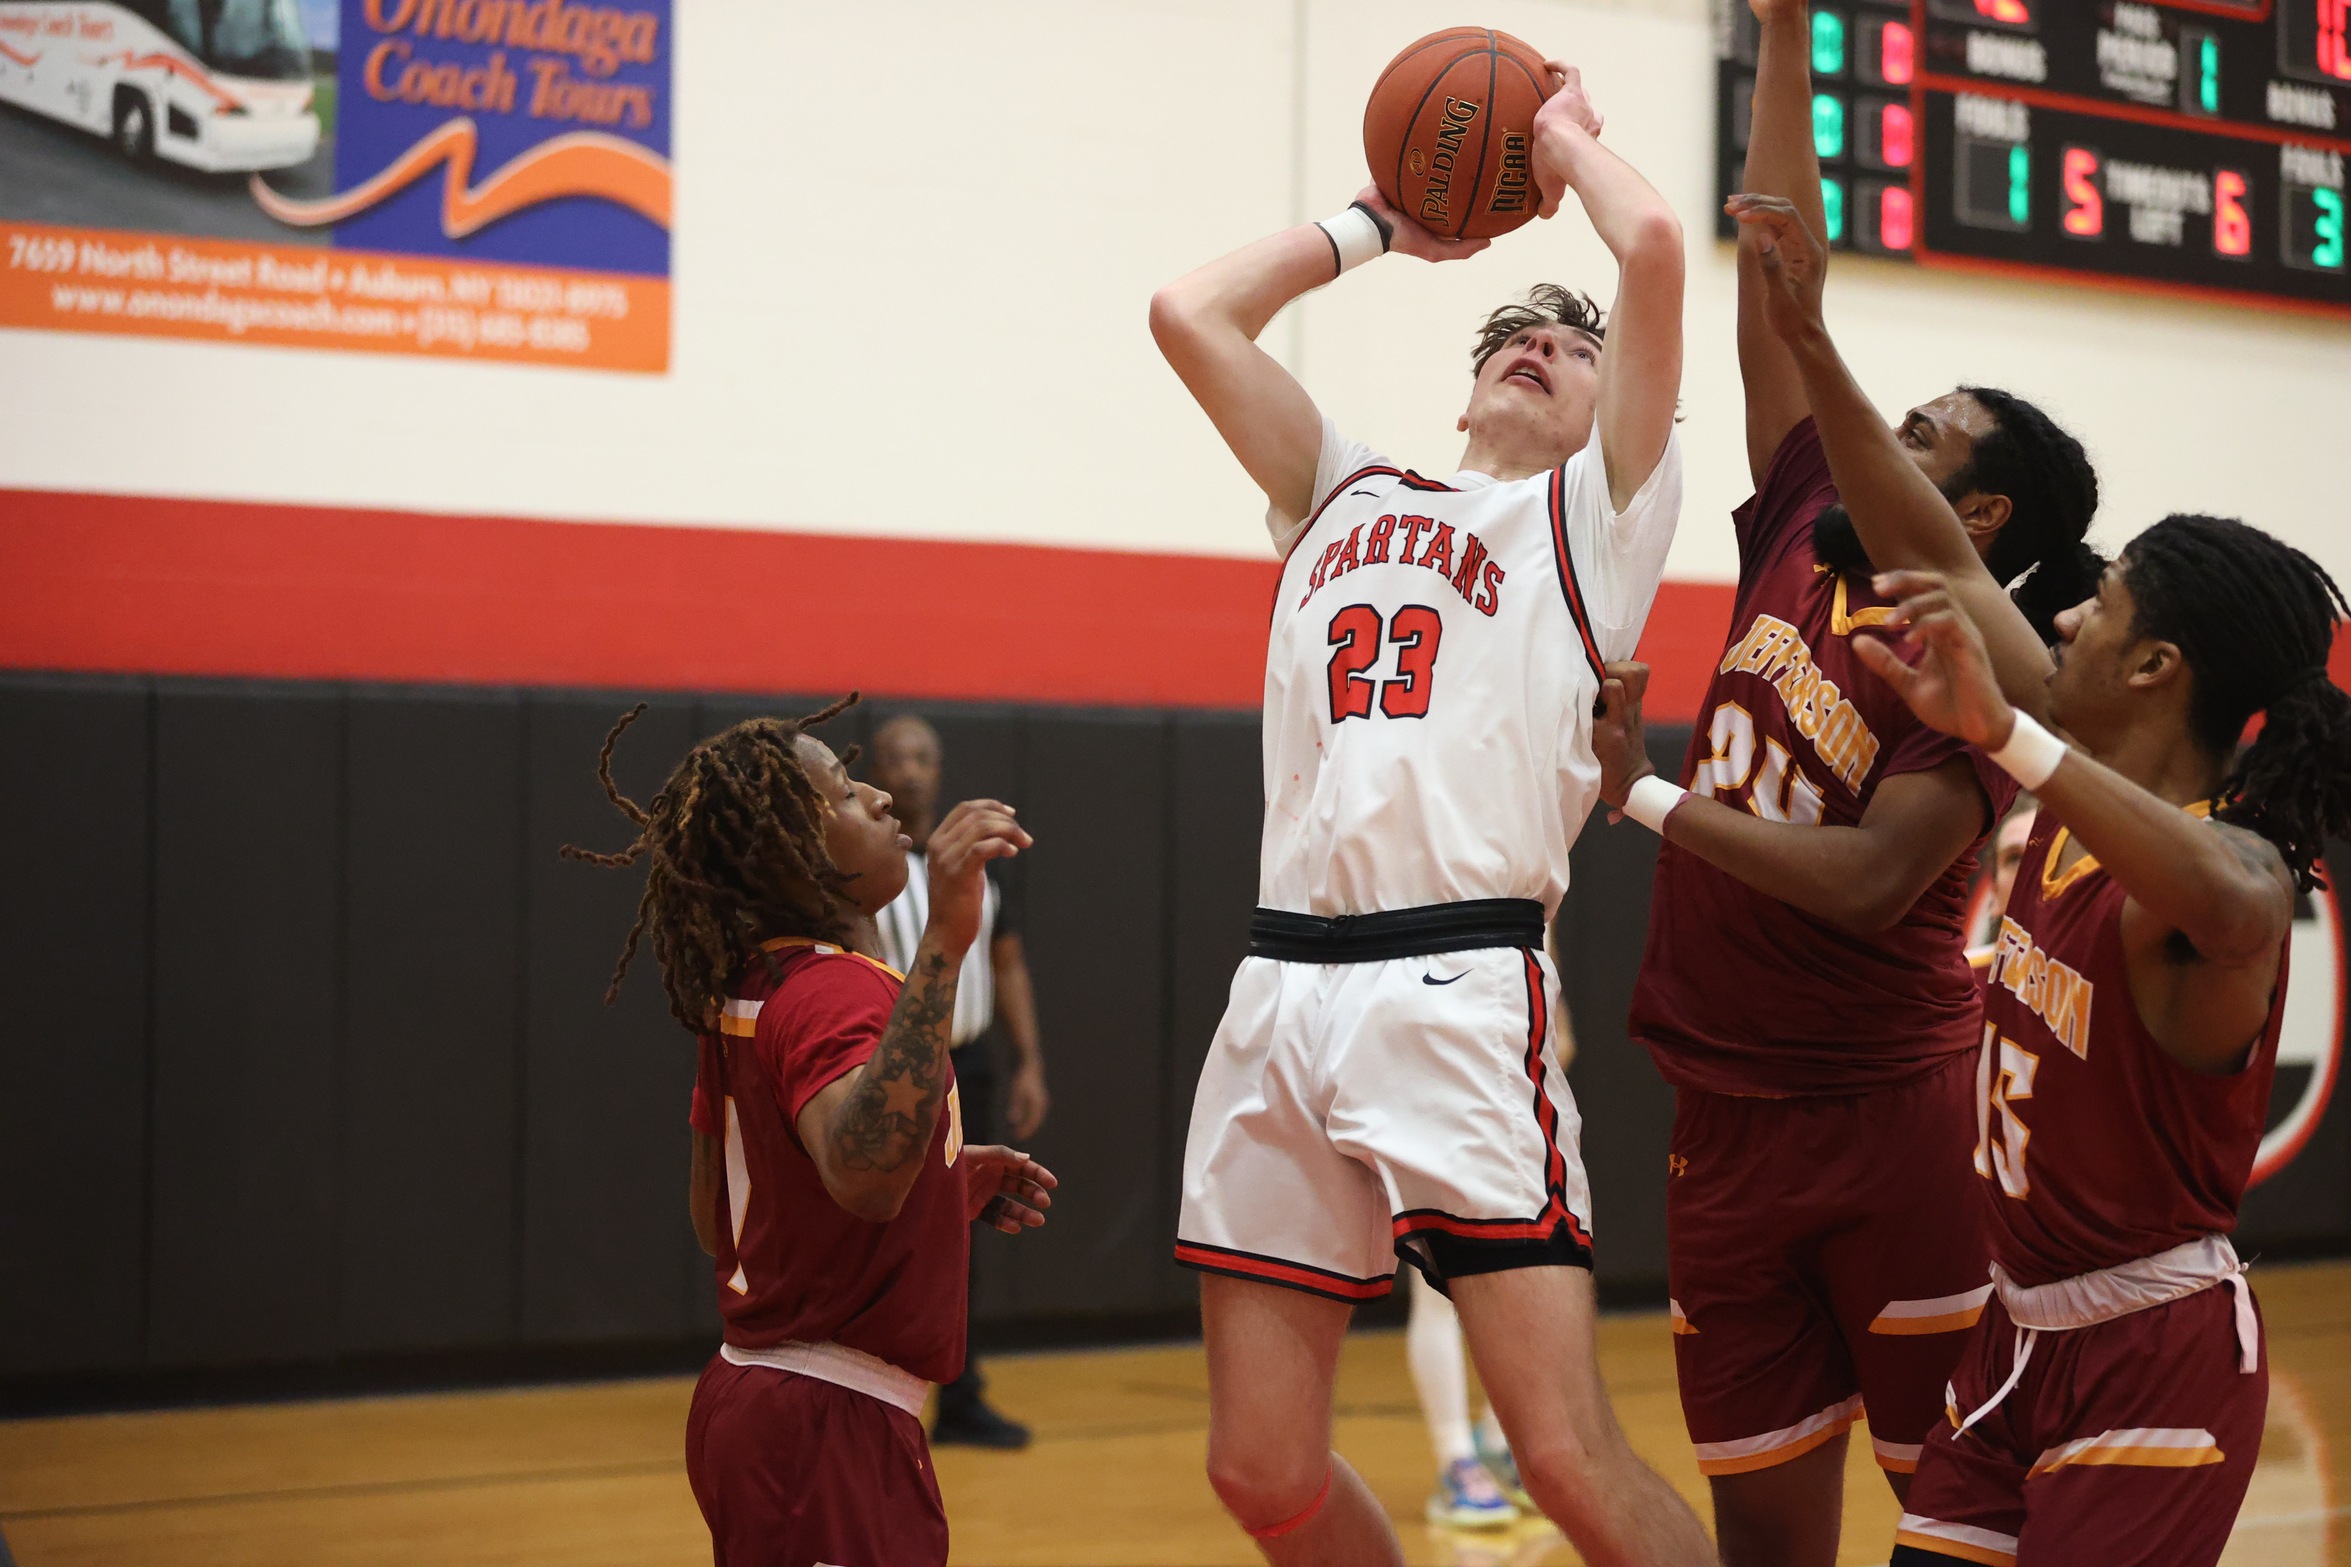 Ryan Adams had a team-high 10 rebounds in a road loss to FMCC on Saturday.